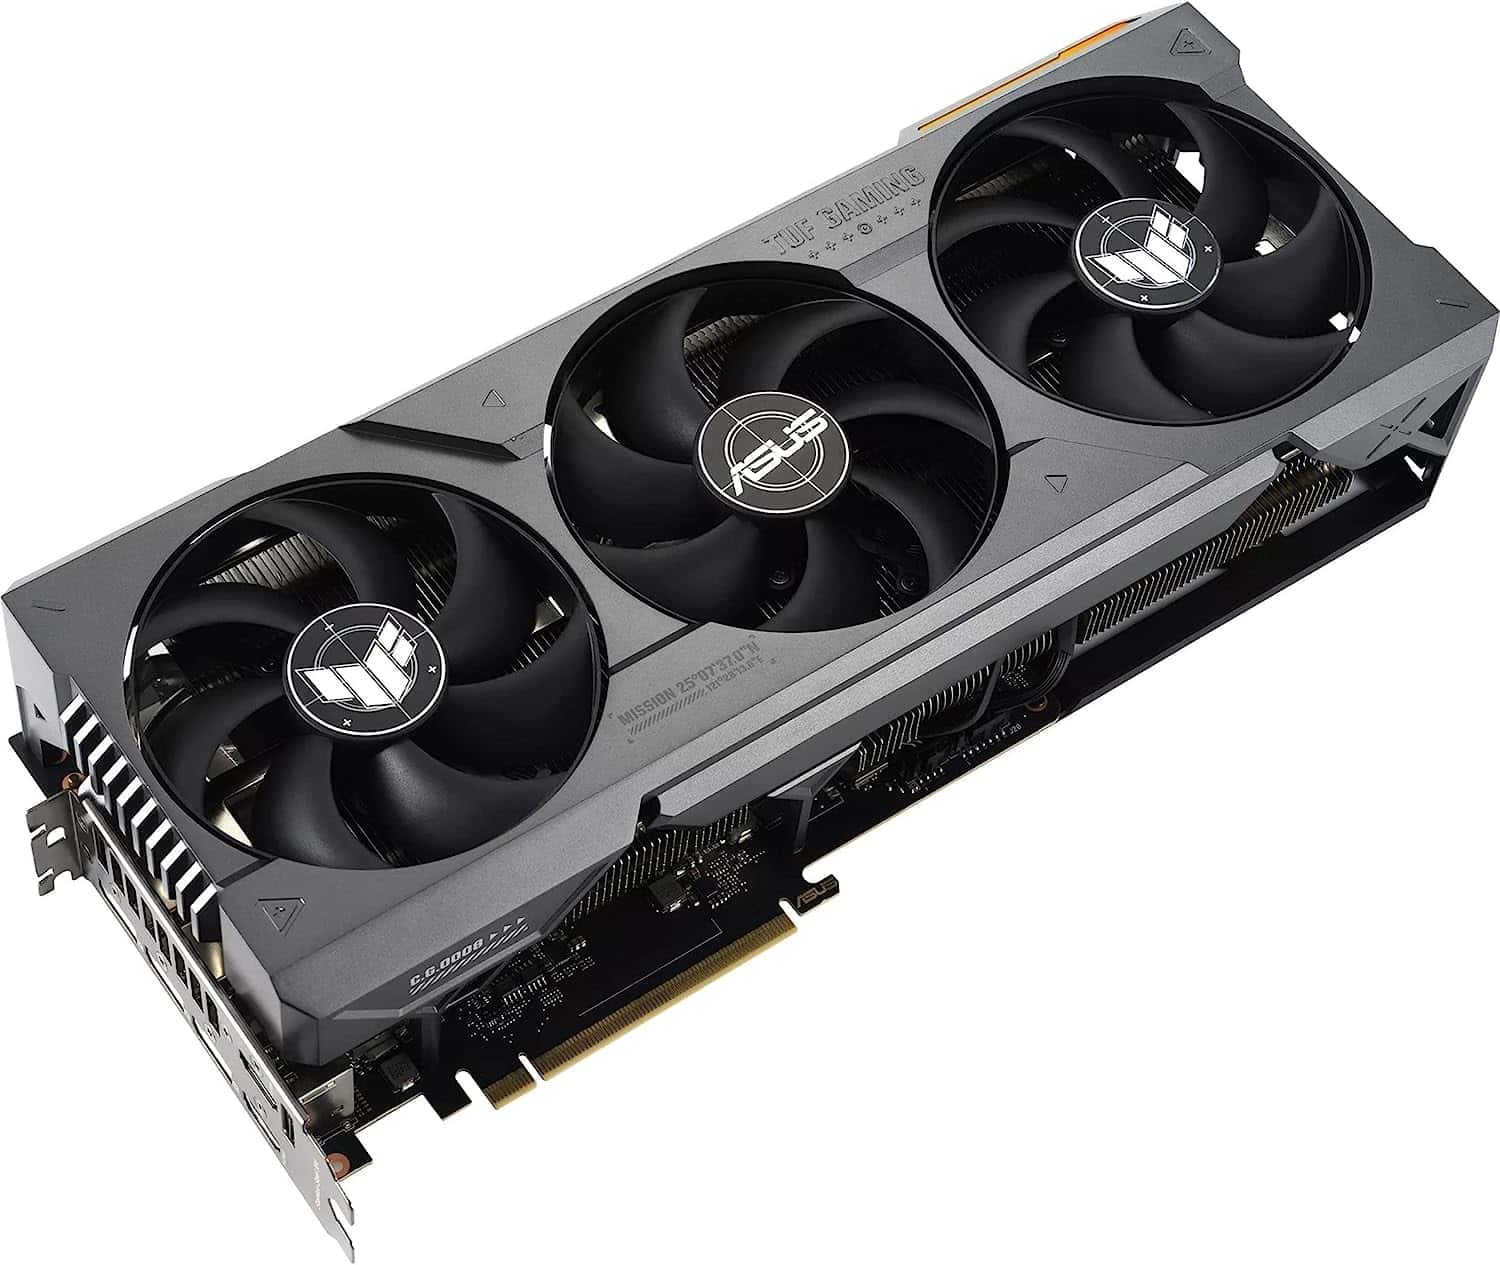 The ASUS TUF Gaming GeForce RTX 2080 is a powerful graphics card.